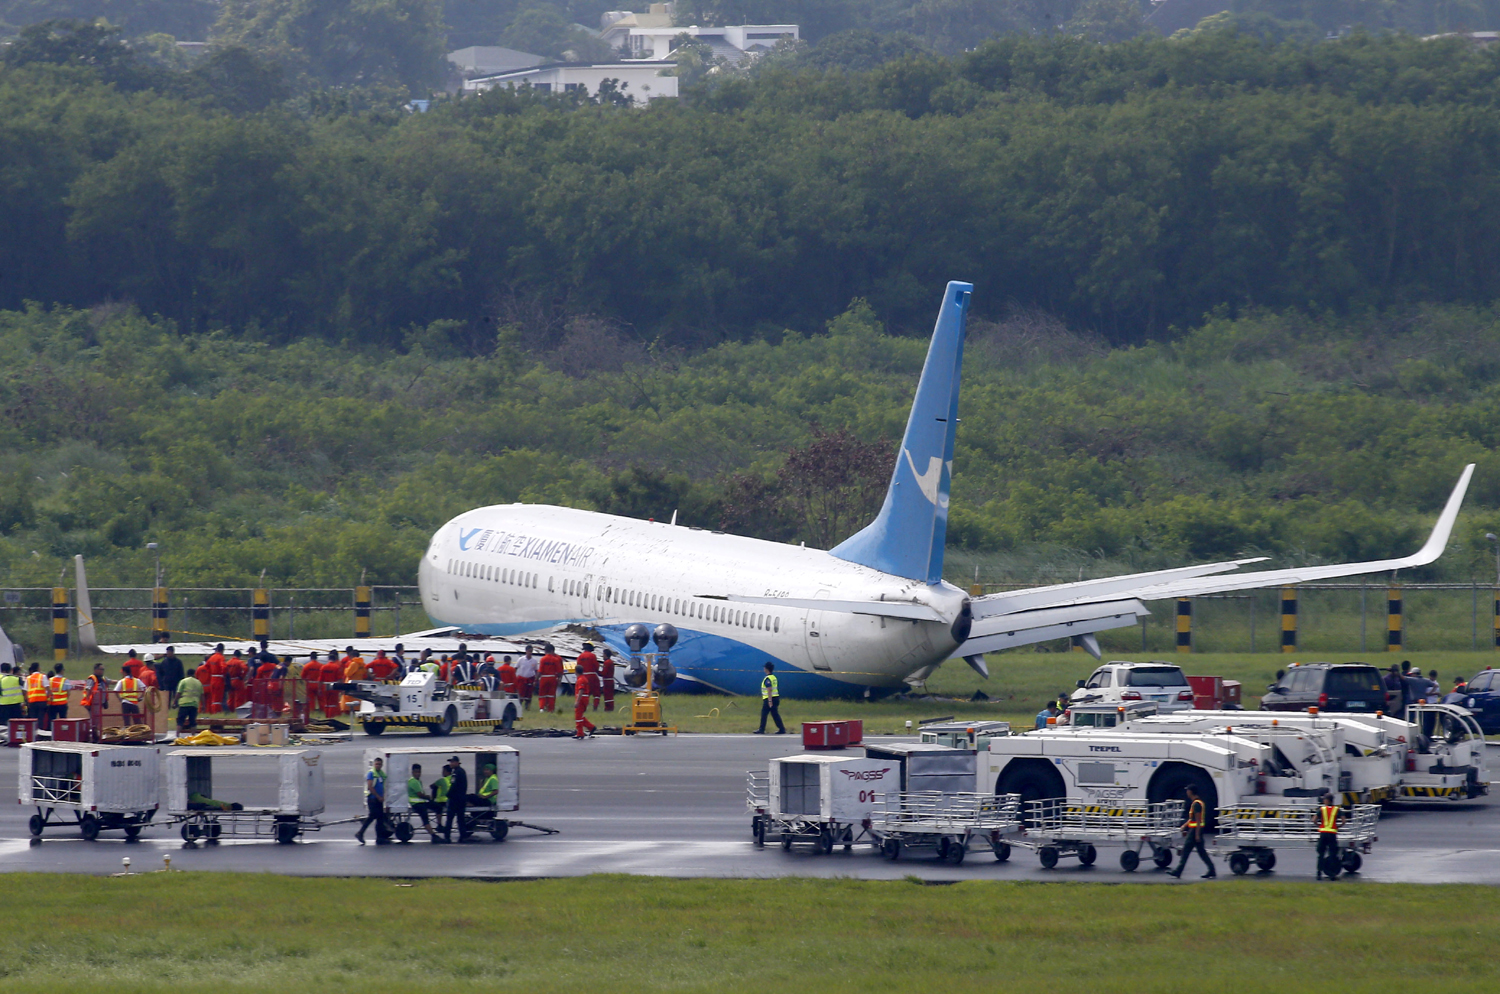 A Boeing passenger plane from China, a Xiamen Air, sits on the grassy portion of the runway of the Ninoy Aquino International Airport after it skidded off the runway while landing Friday, Aug. 17, 2018 in suburban Pasay city southeast of Manila, Philippines. All the passengers and crew of Xiamen Air Flight 8667 were safe and were taken to an airport terminal, where they were given blankets and food before being taken to a hotel. [Photo: AP/Bullit Marquez]